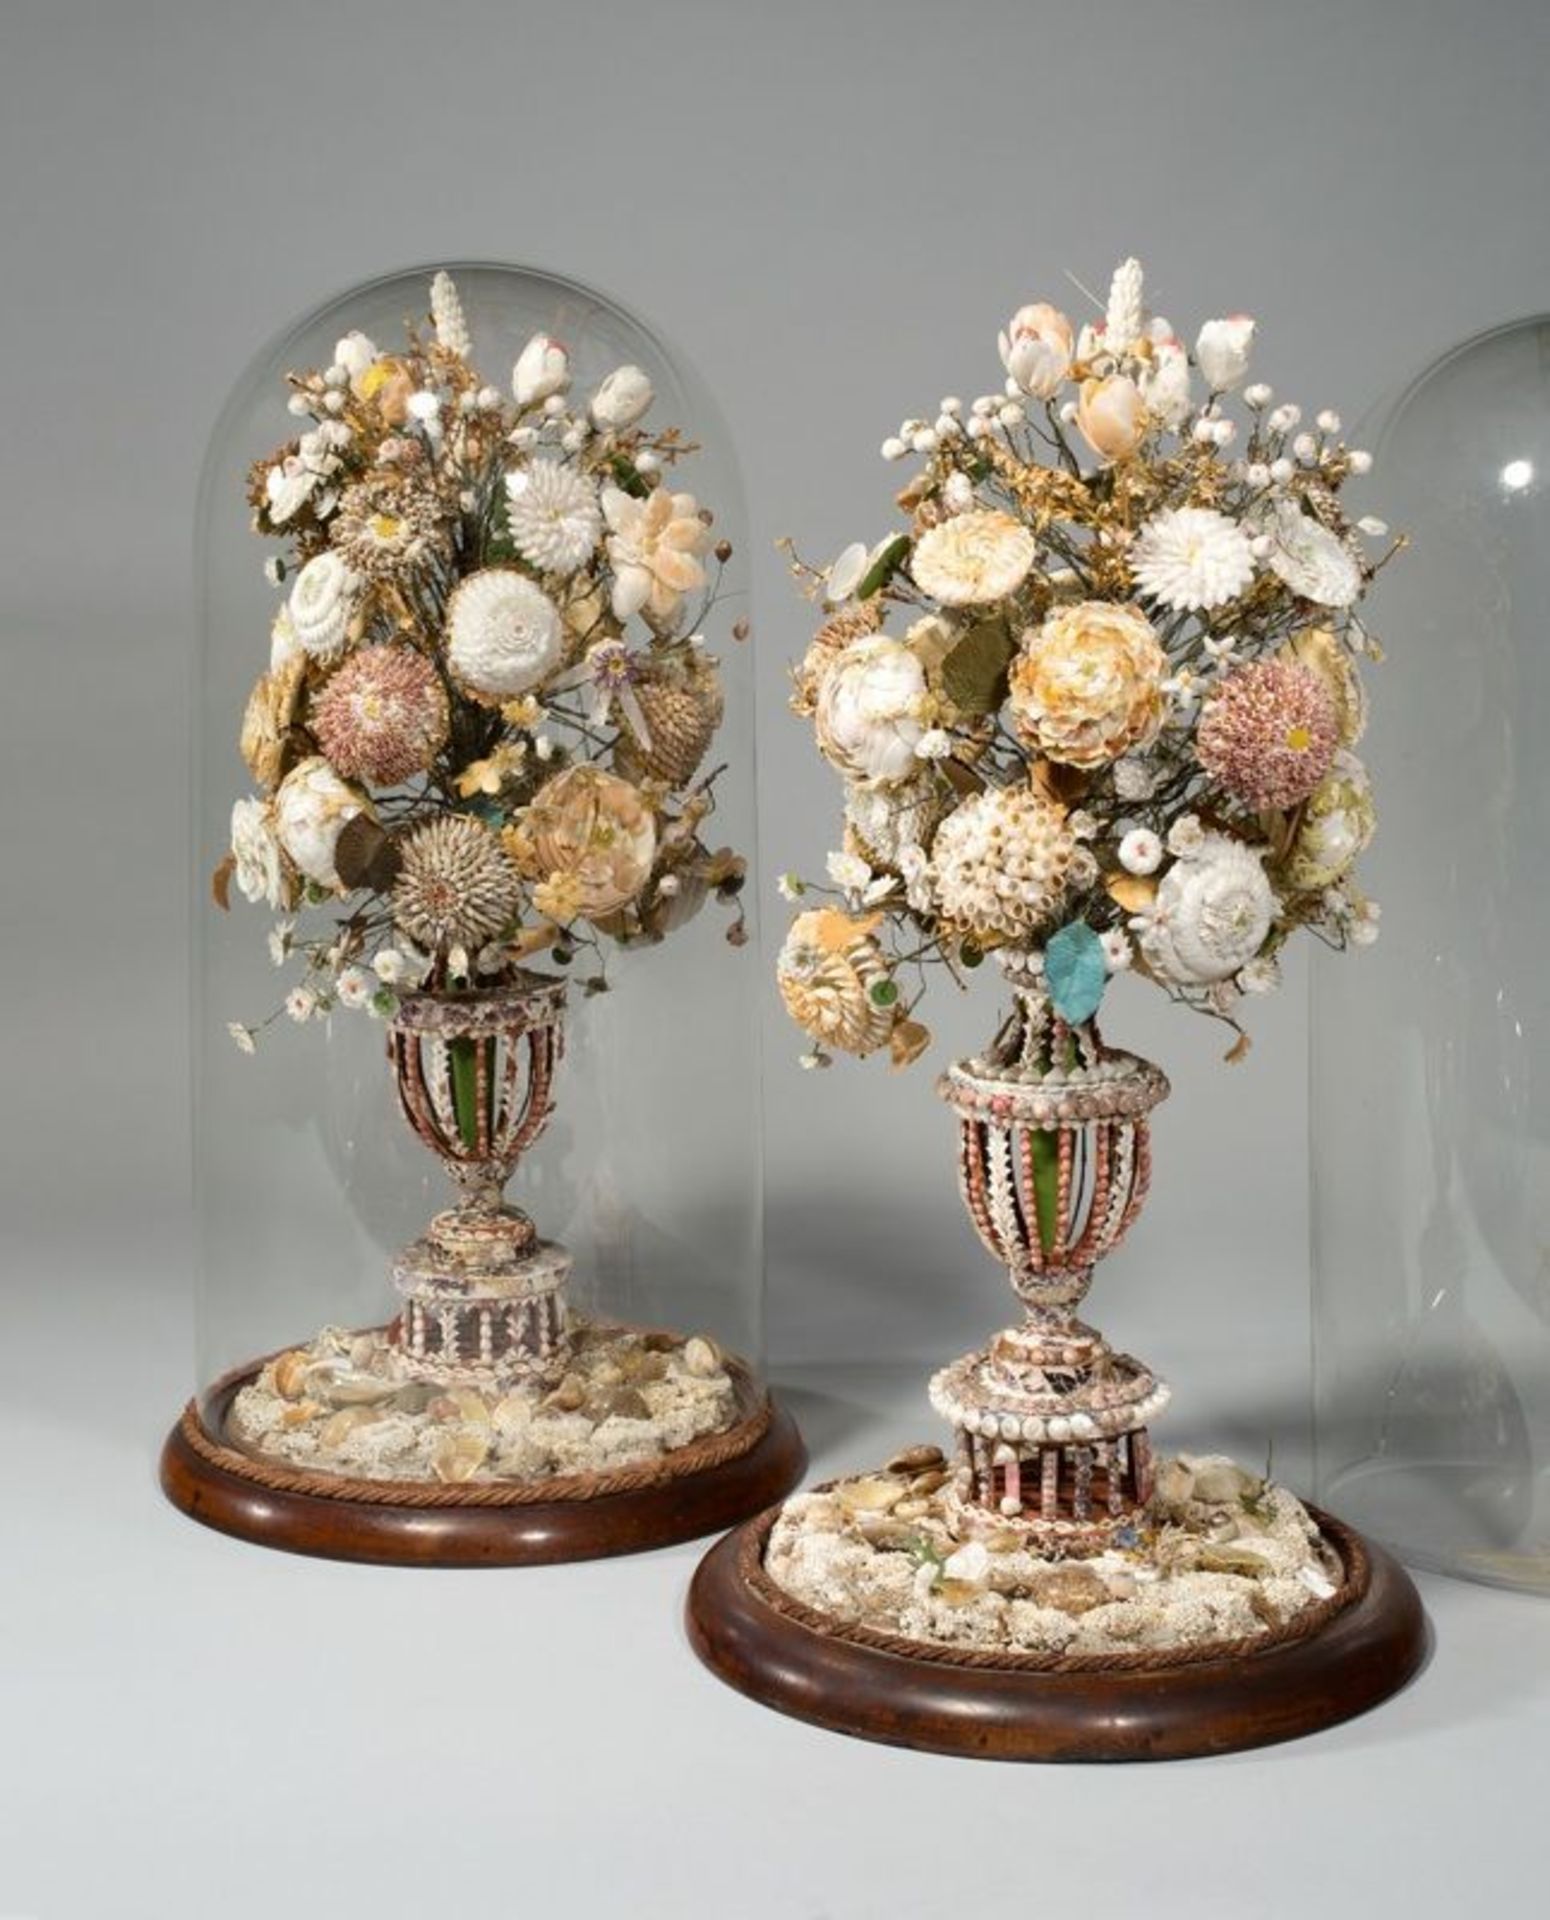 England ()  TWO SHELLWORK BOUQUETS. Circa 1800  Shells; wire; silk; paper; wood base, bell jars.  54